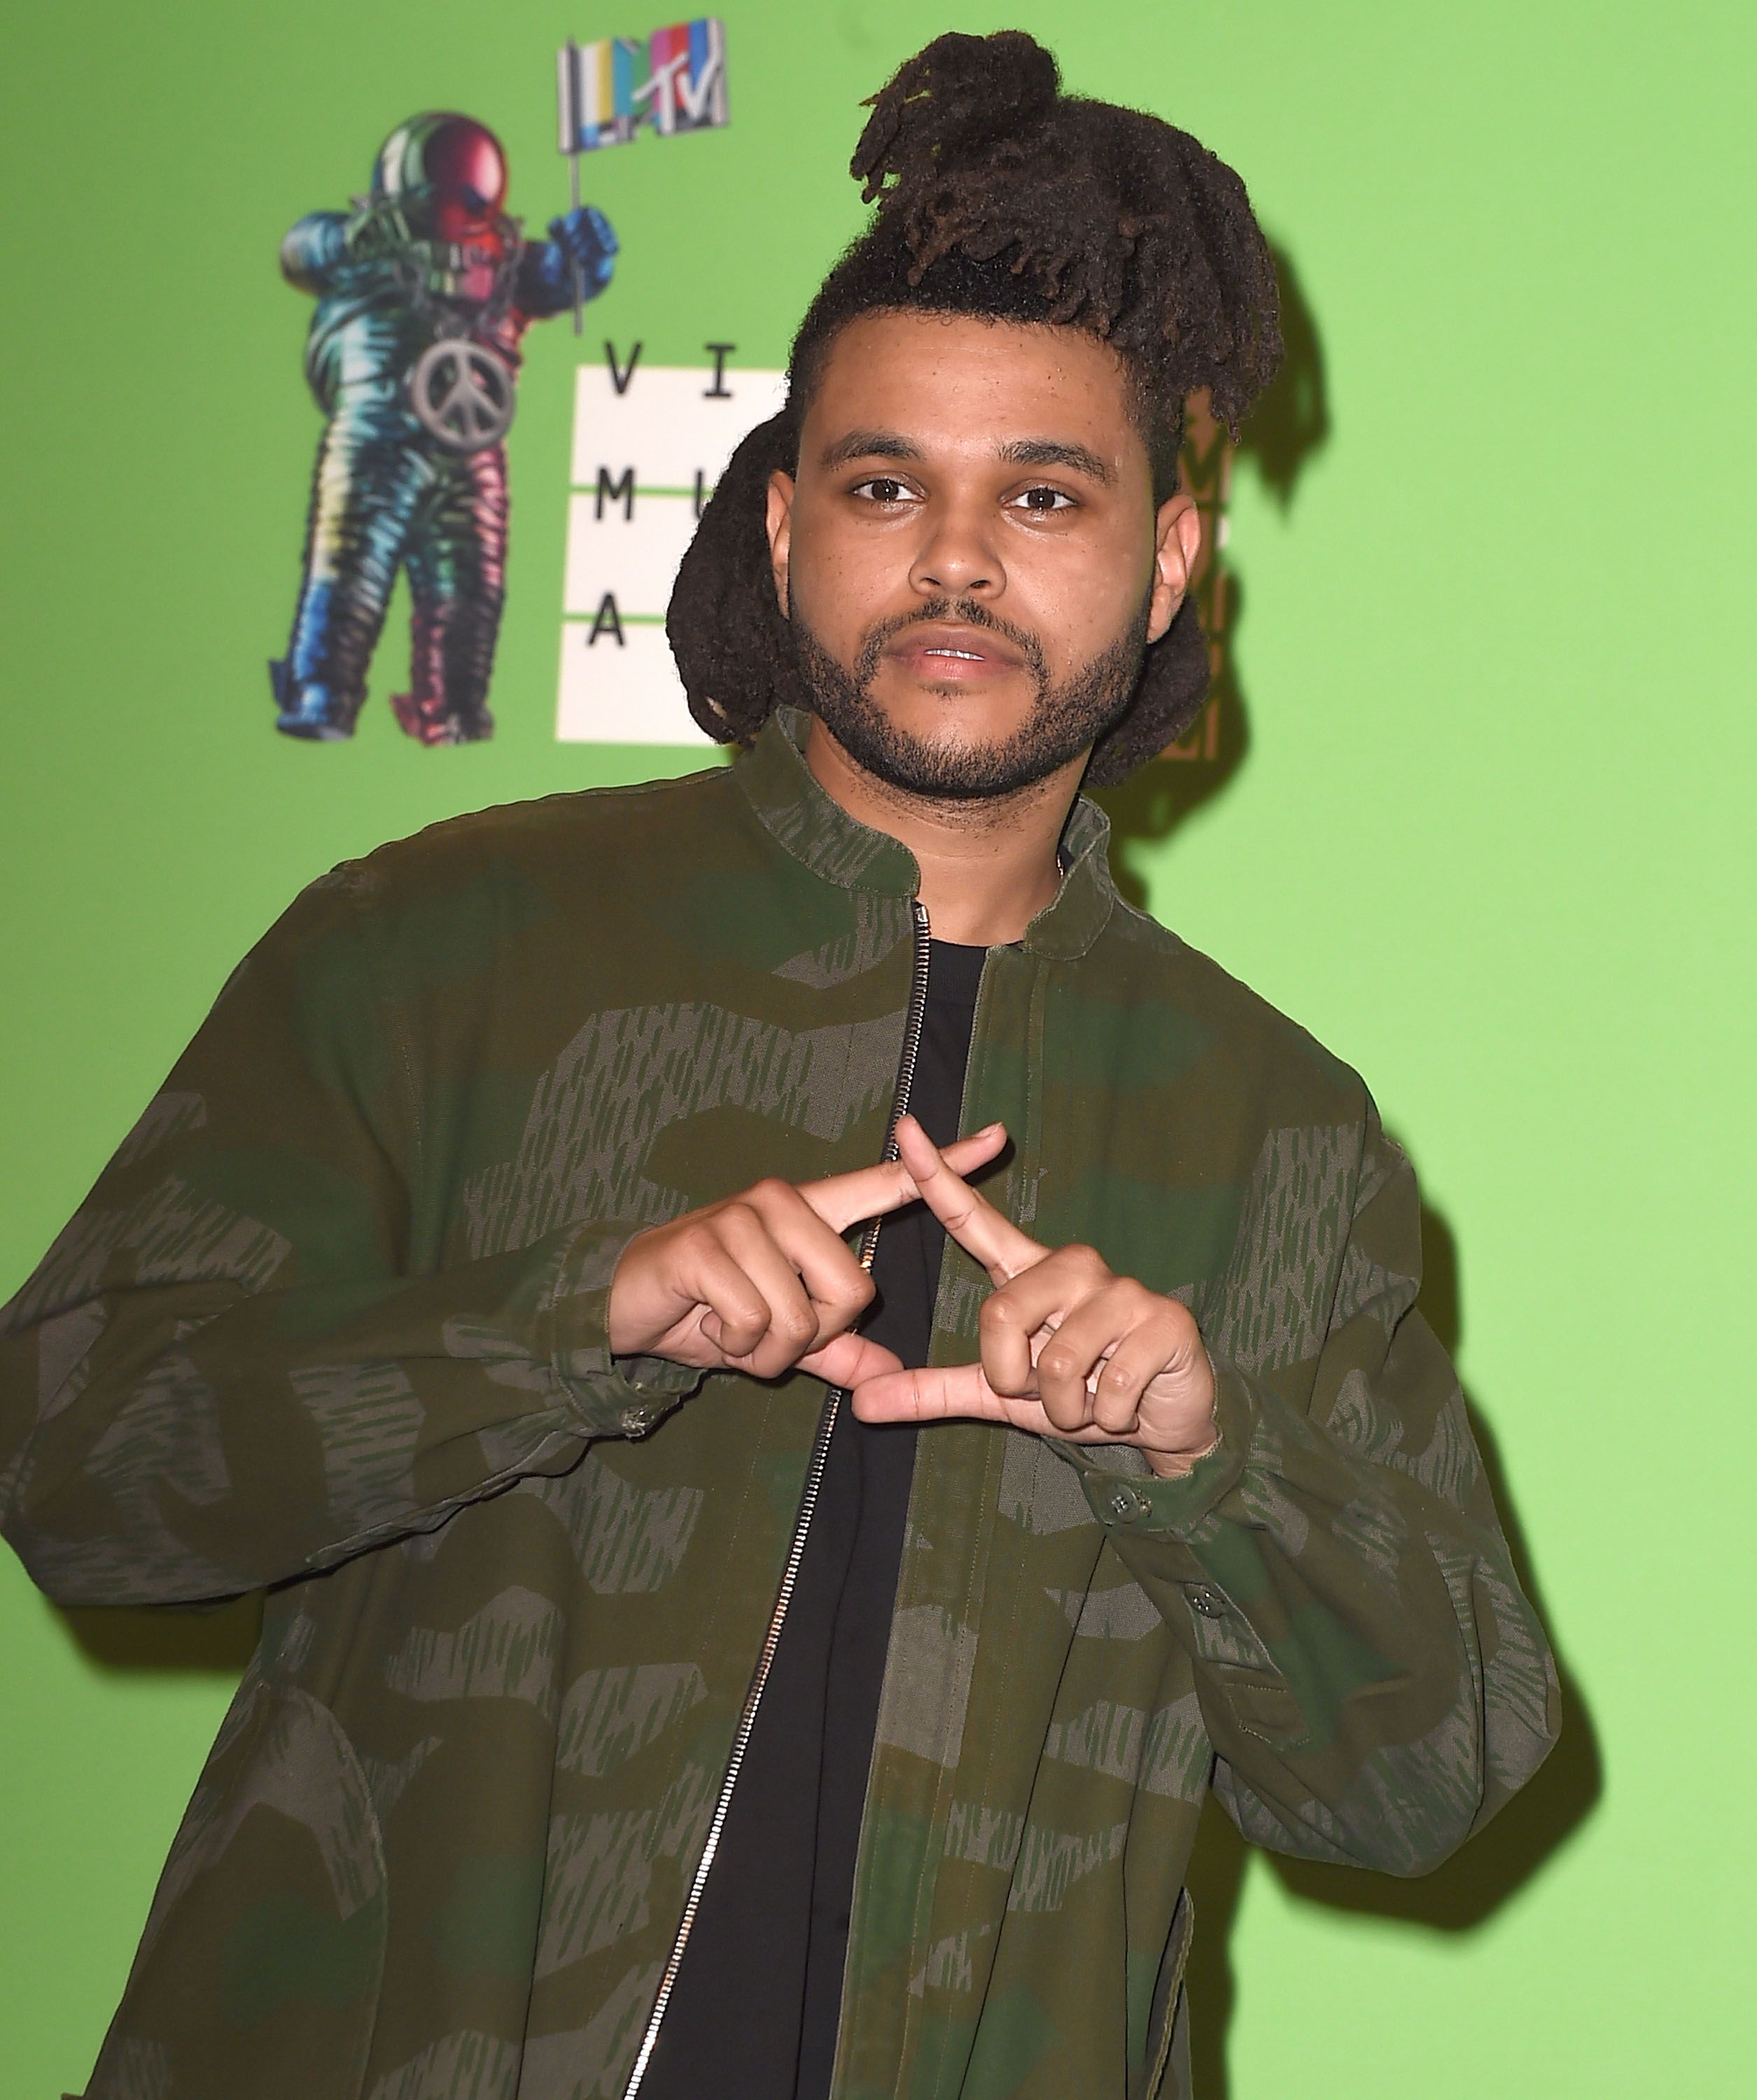 The Weeknd at the MTV Video Music Awards on August 30, 2015, in Los Angeles, California | Photo: Steve Granitz/WireImage/Getty Images